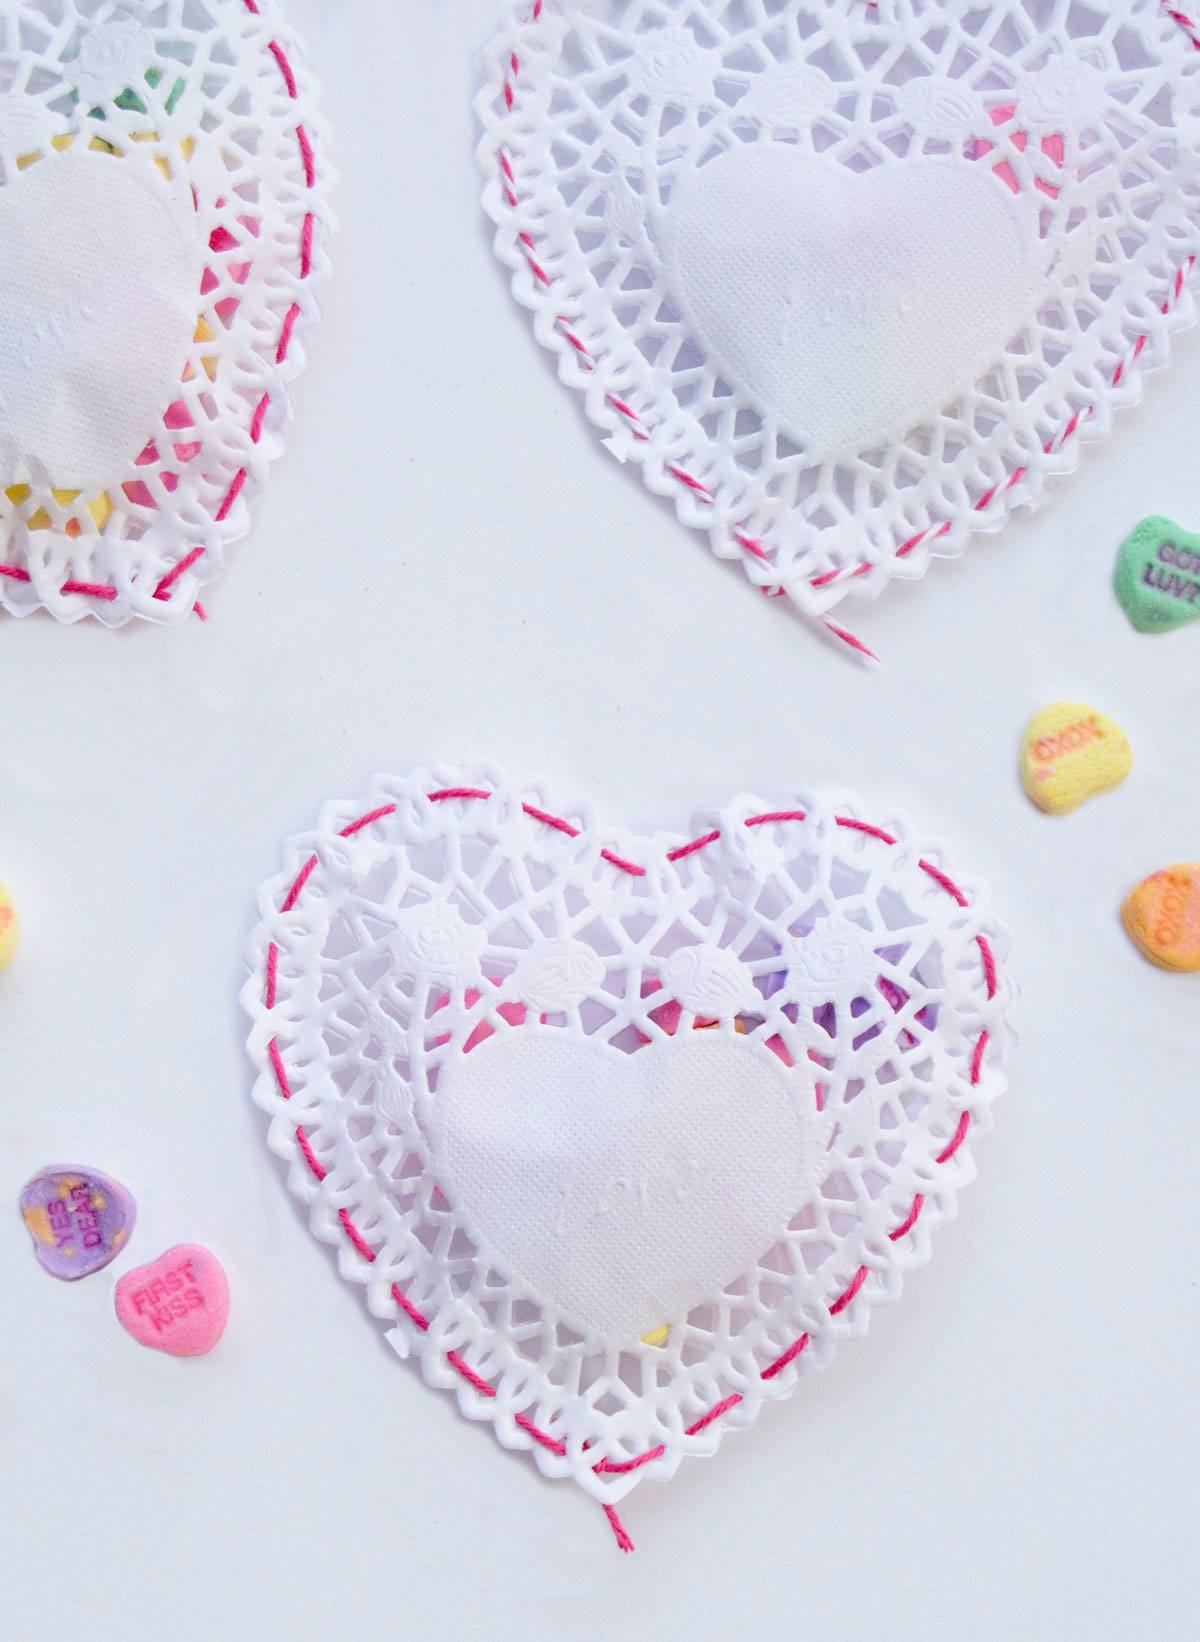 Doily Heart Pouch Tutorial by Lindi Haws of Love The Day